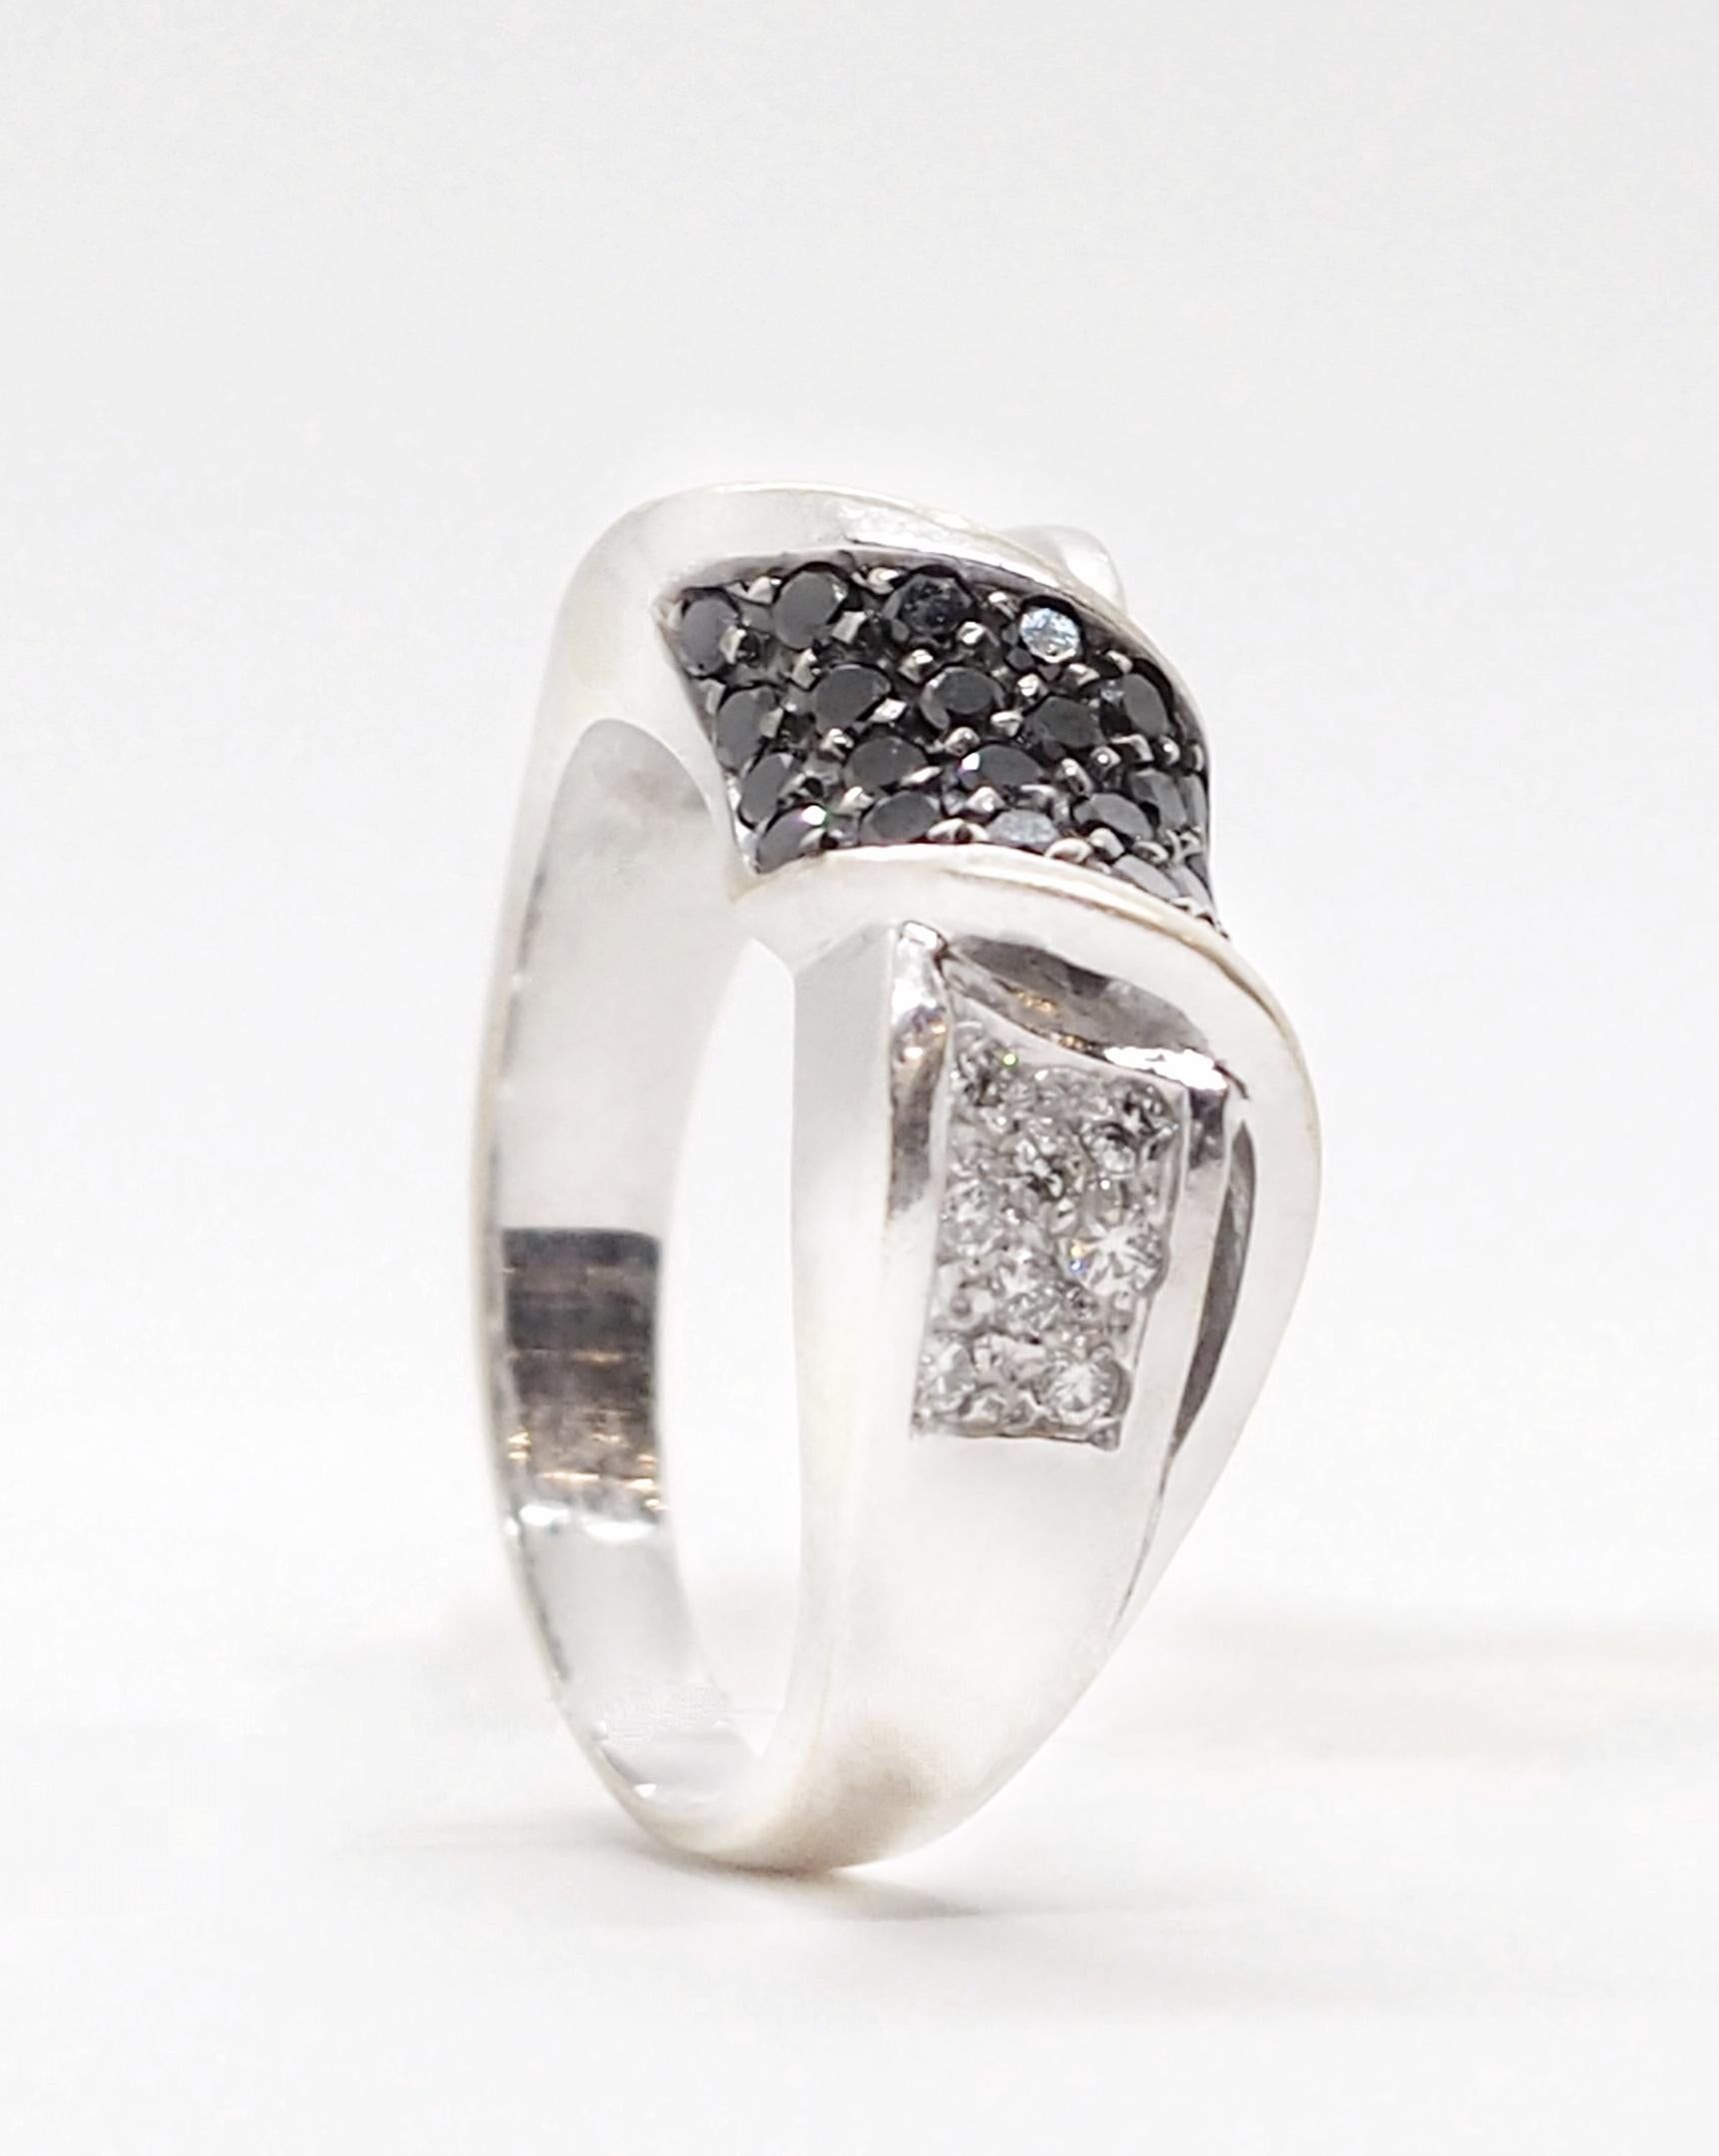 An elegant black and white diamond ring crafted in 18K white gold. It features black (0.8 carat) and white (0.5 carat) diamonds. The central part of the ring is represented by a bow paved with bi-color diamonds. The ring goes well with any outfits